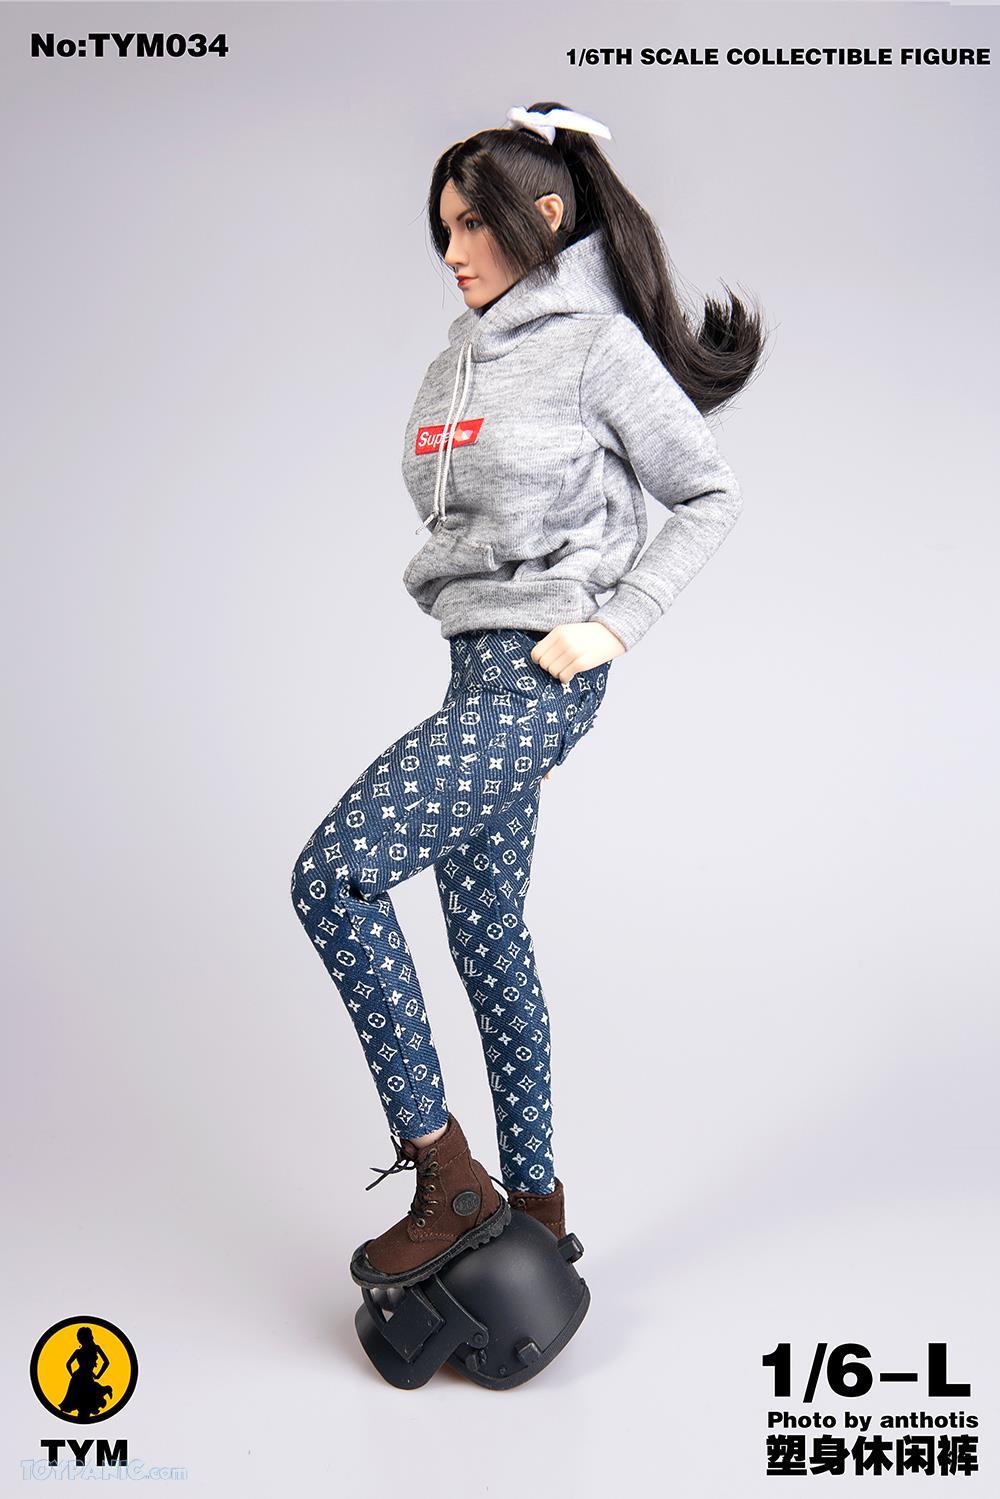 TrendyJeans - NEW PRODUCT: 1/6 LL Trendy printed jeans  From Technic Toys  Code: TYM034 61201910